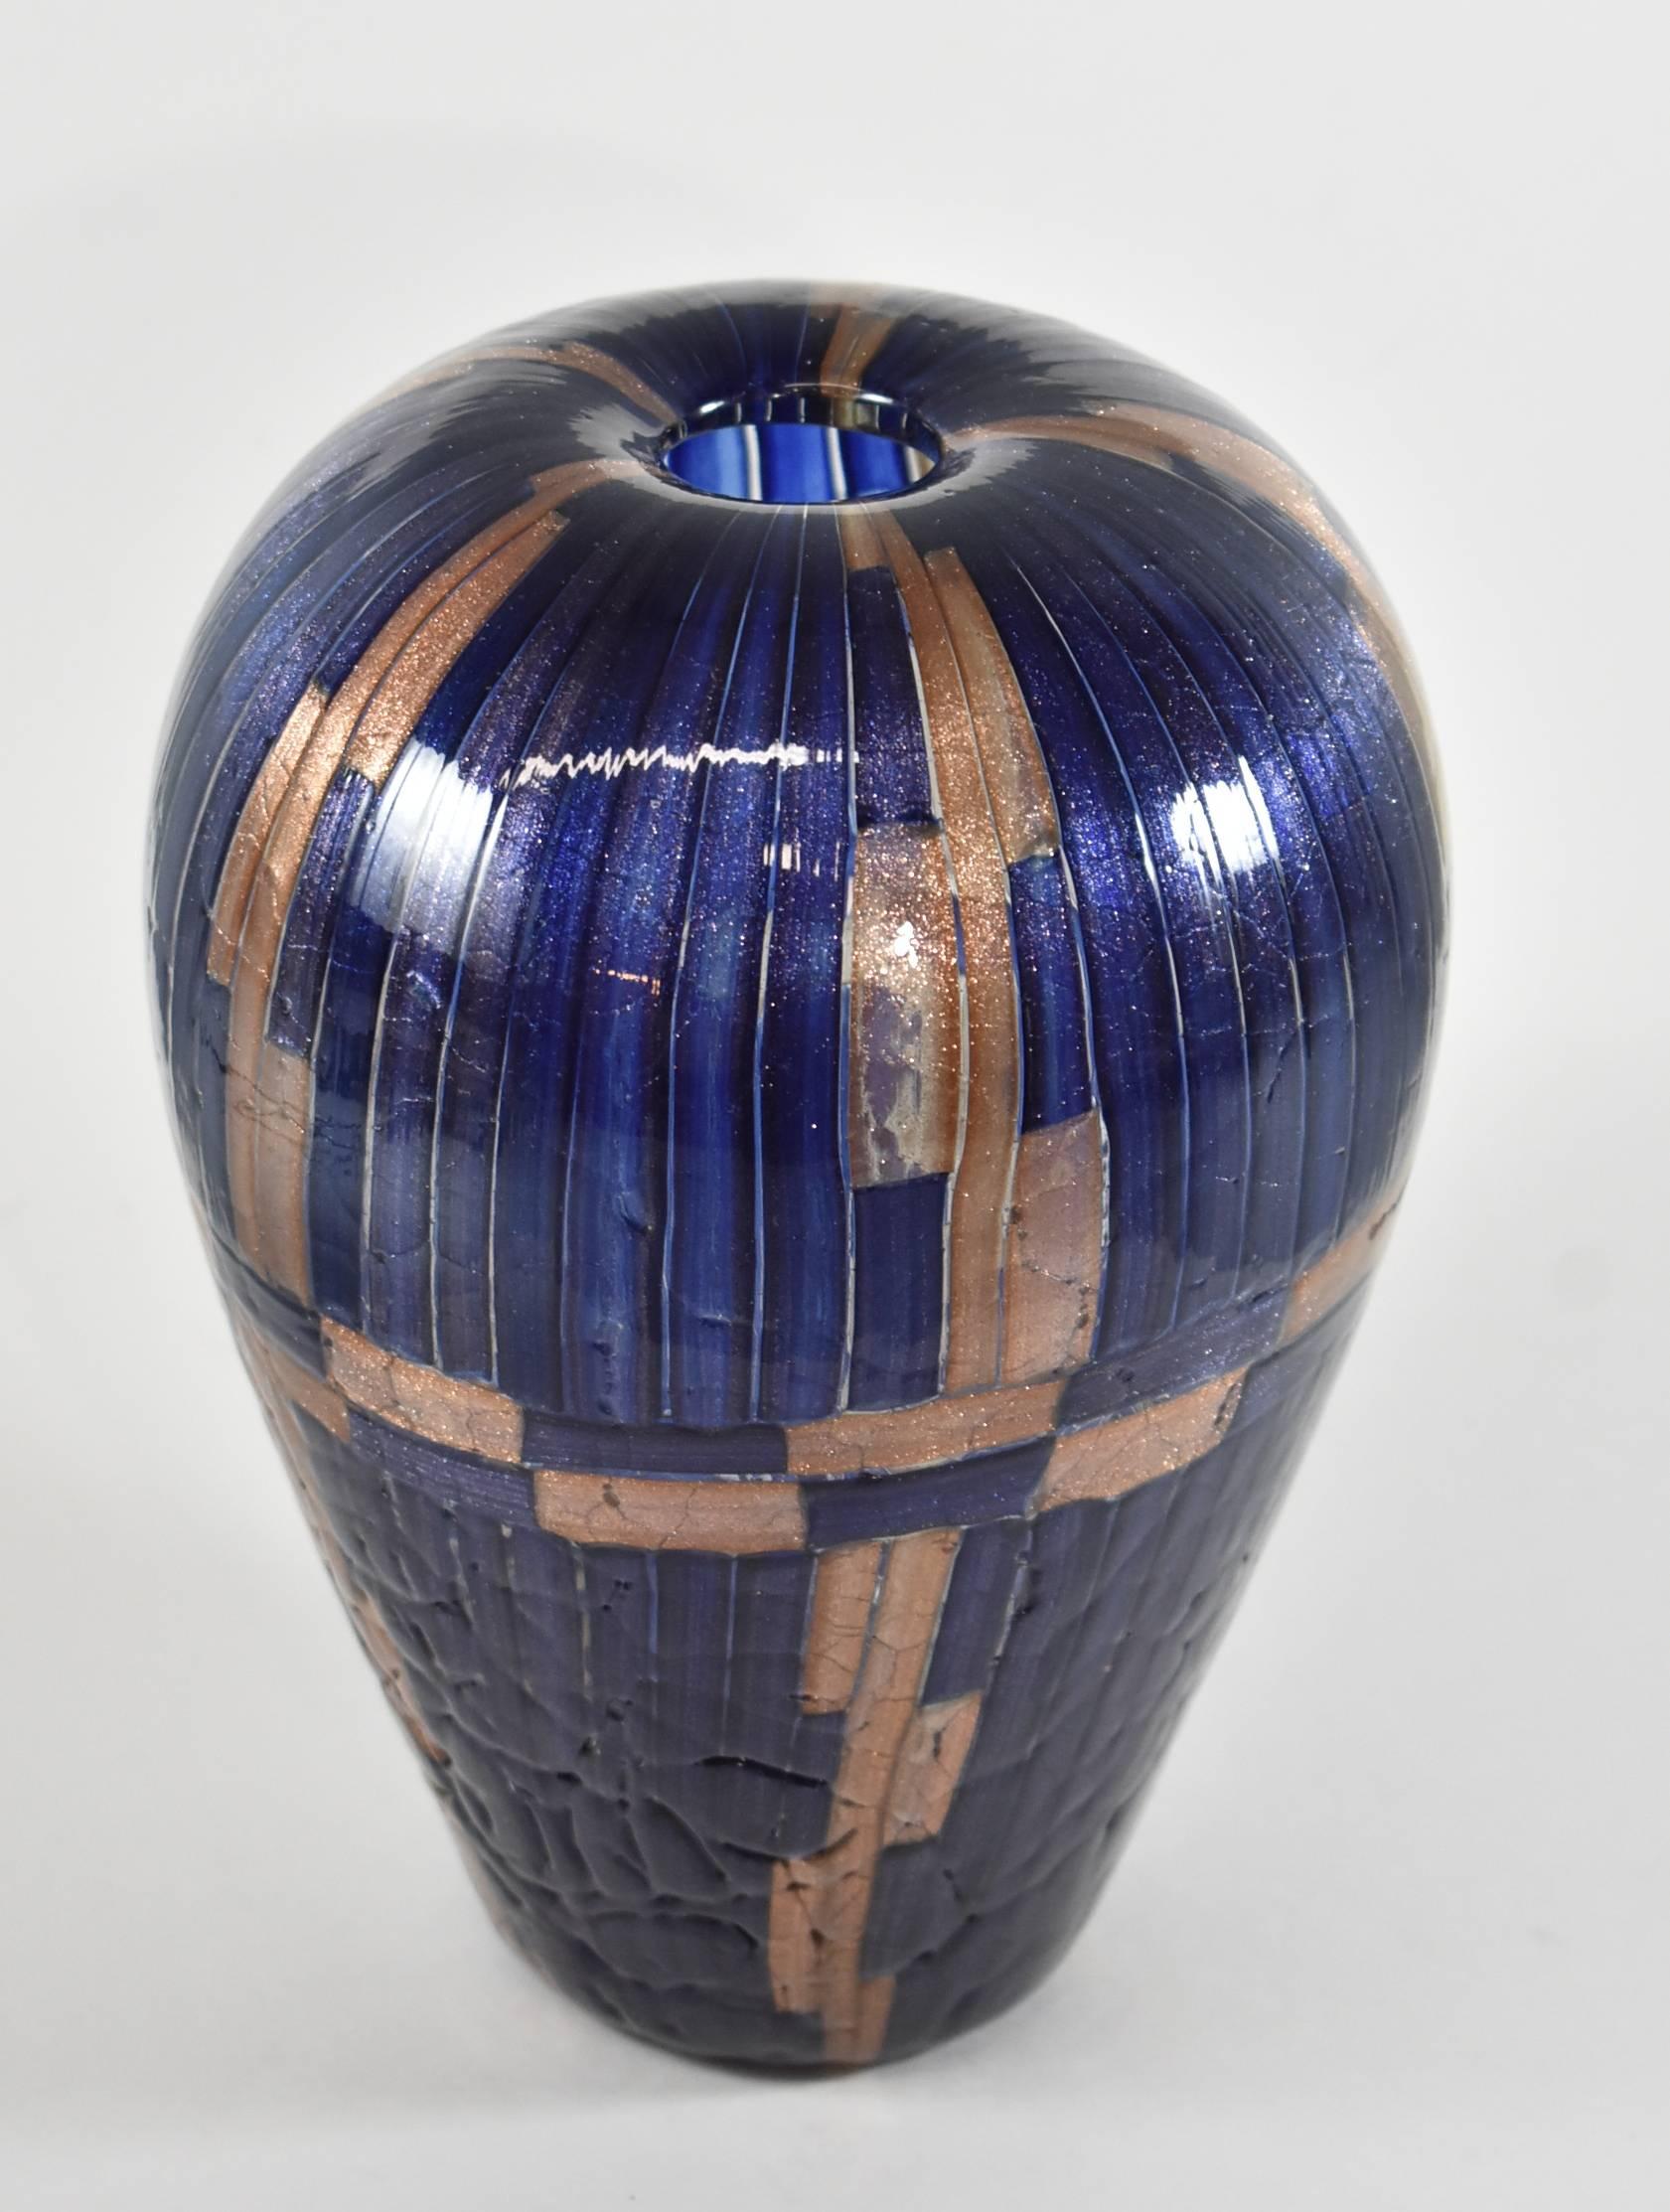 A beautiful cobalt blue vase with gold accents by Massimo Nordio. Massimo Nordio was born in Venice in 1947. He worked for Murano in 1980 while launching his own studio. He has pieces on permanent display at the Museo Vetrario Murano, the corning